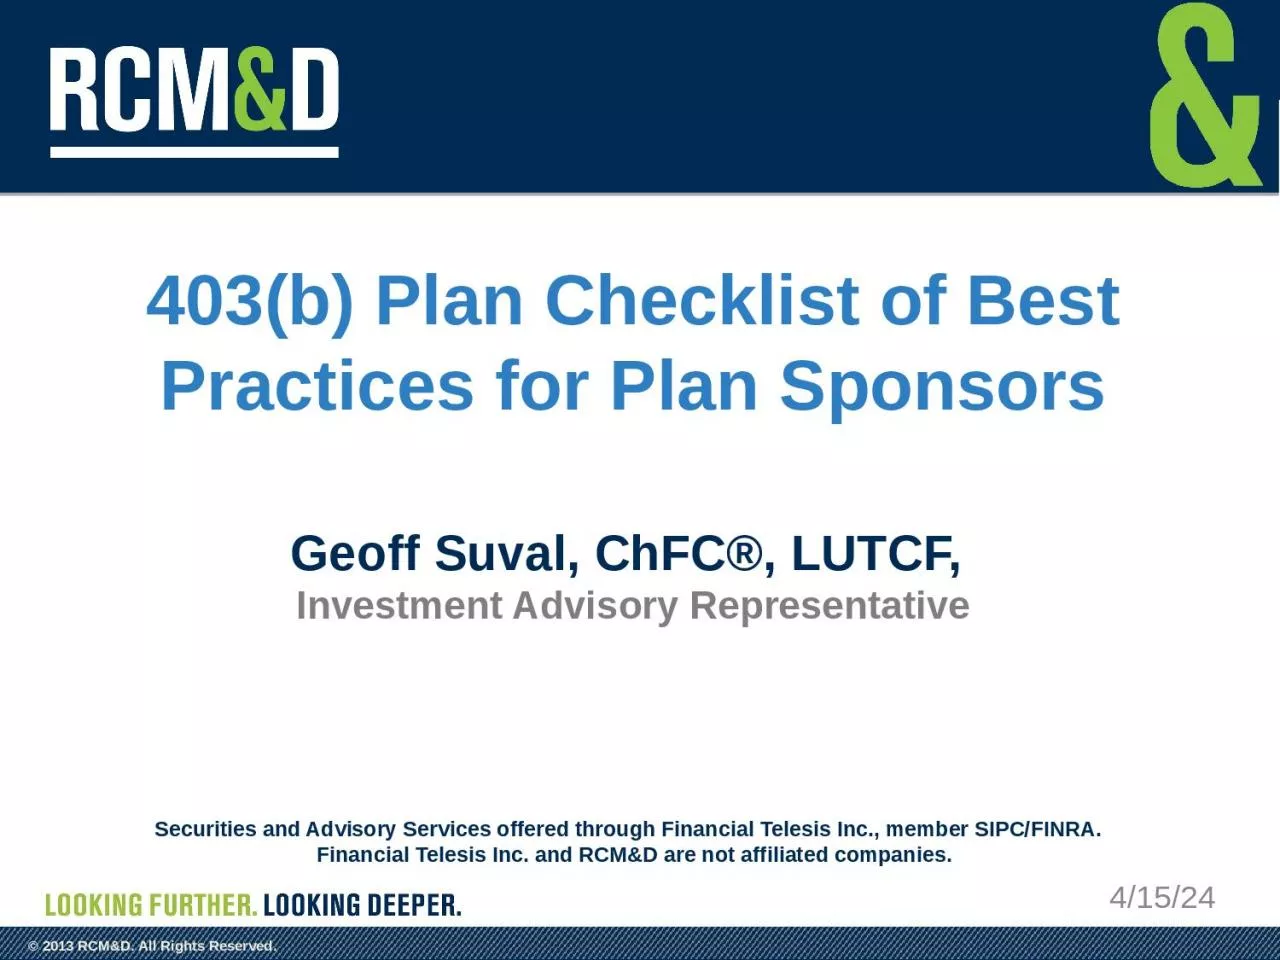 403(b) Plan Checklist of Best Practices for Plan Sponsors